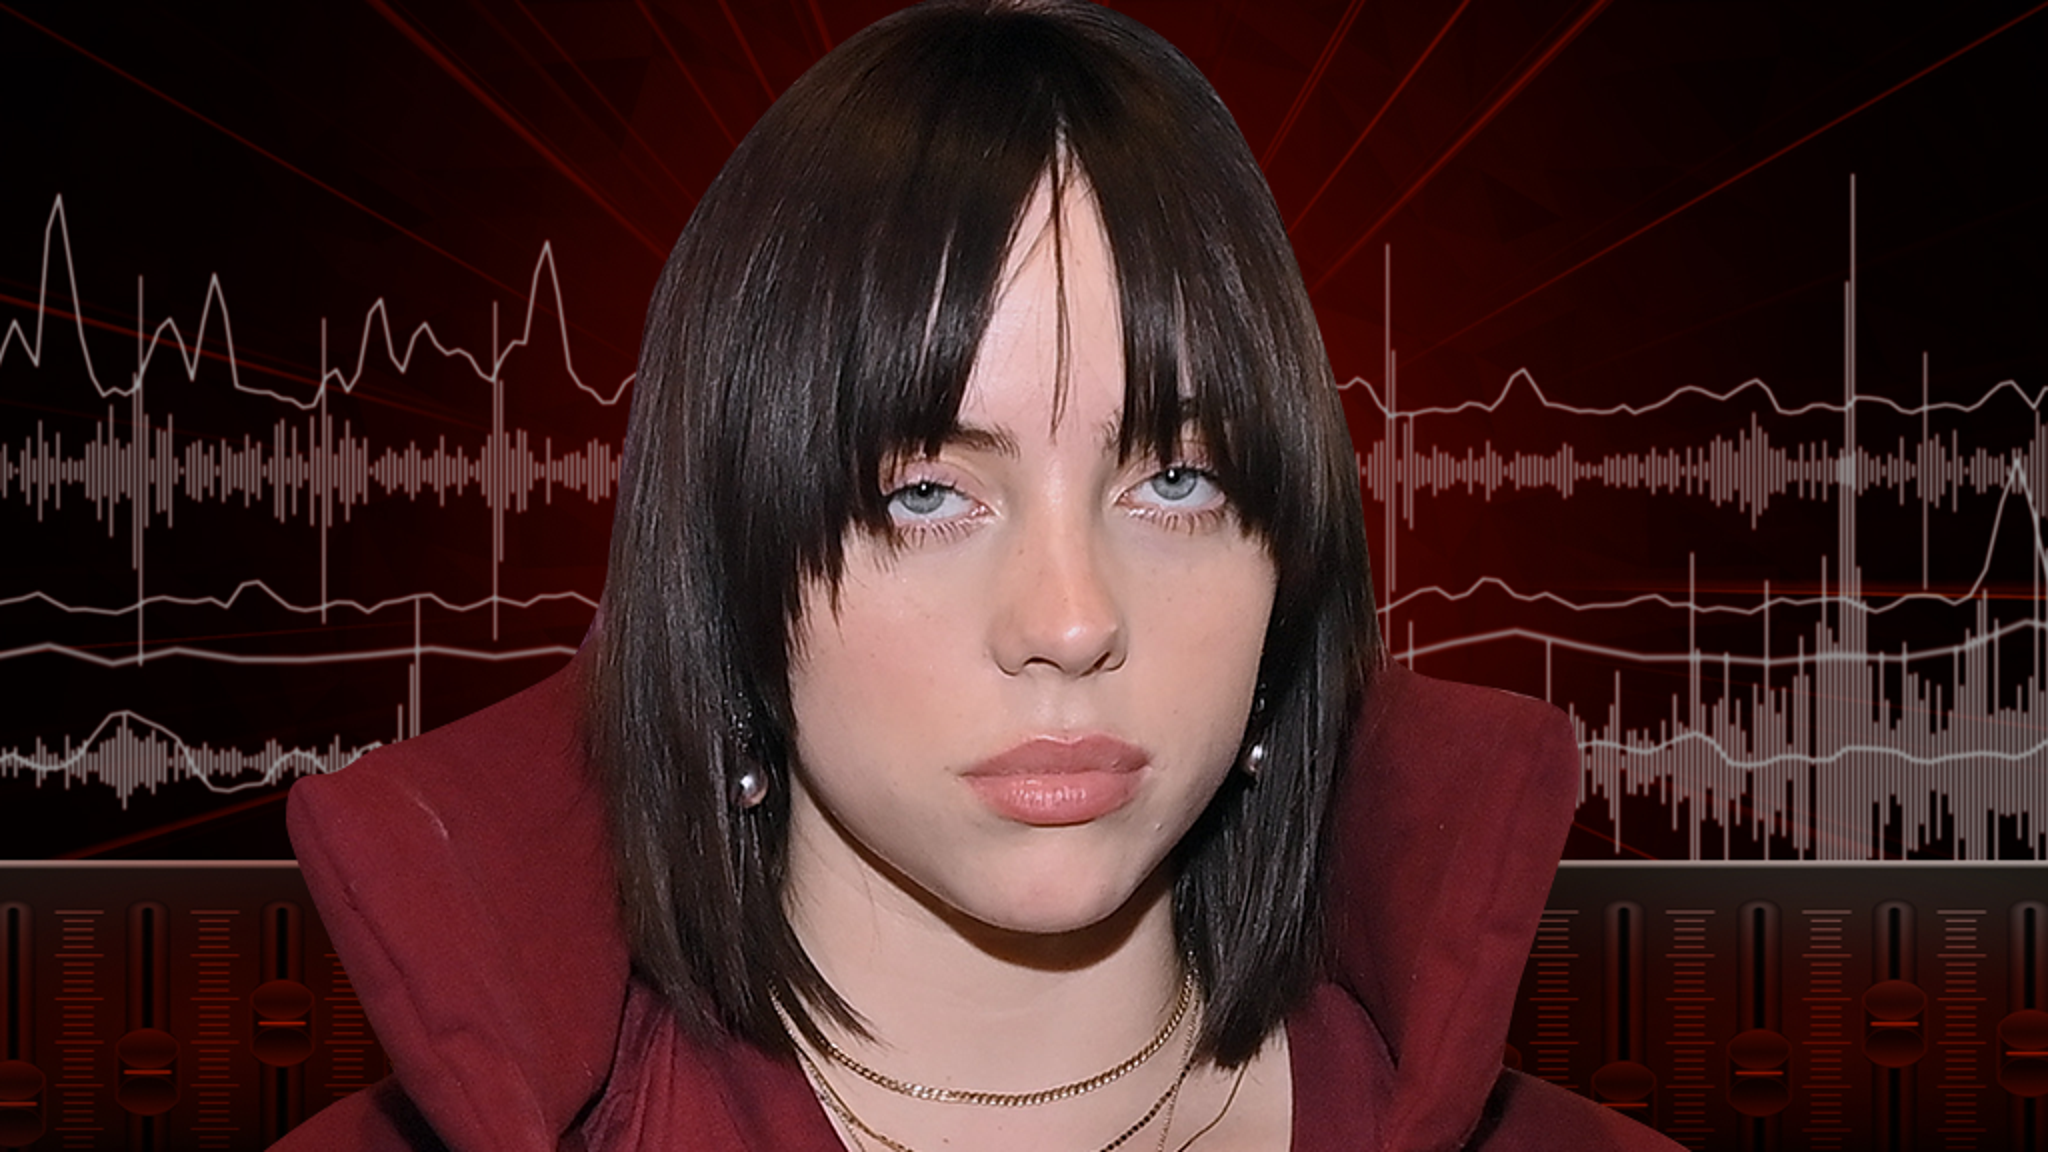 Cahina Sex Video Download - Billie Eilish Says She Started Watching Porn at 11, Calls it 'Disgrace'